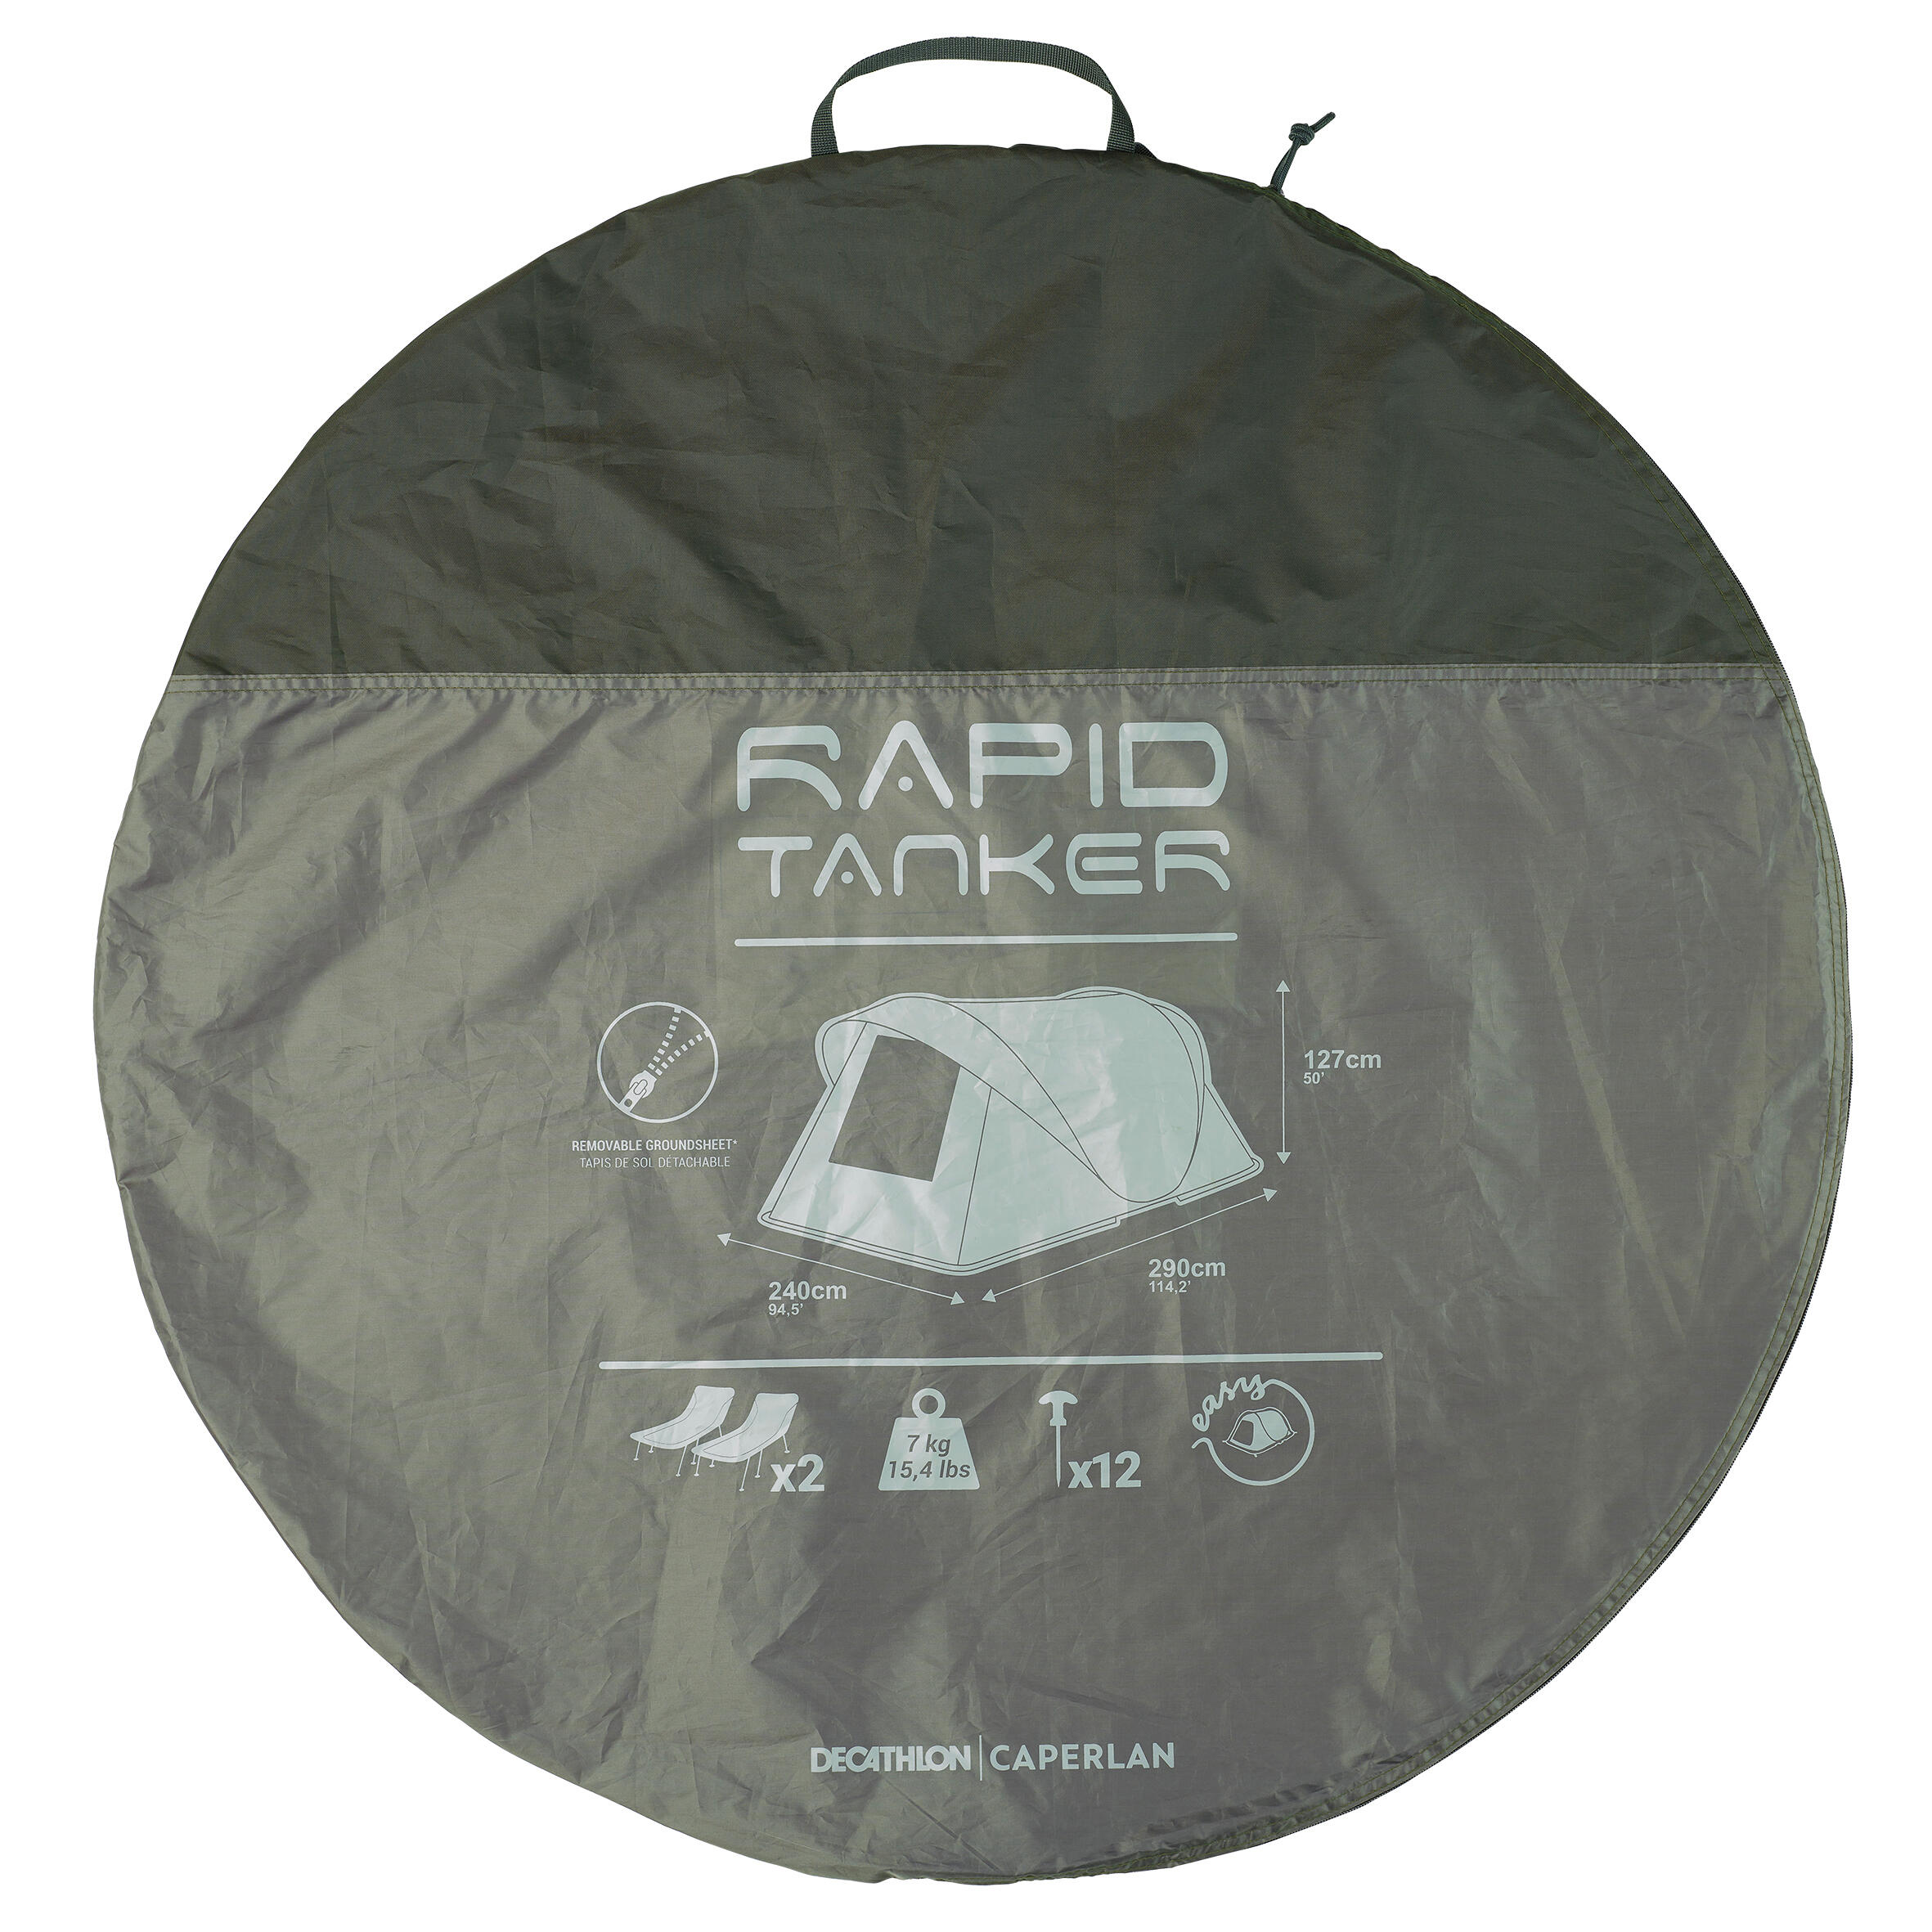 Spare Carry Bag for the Rapid Tanker Bivvy CAPERLAN  Decathlon